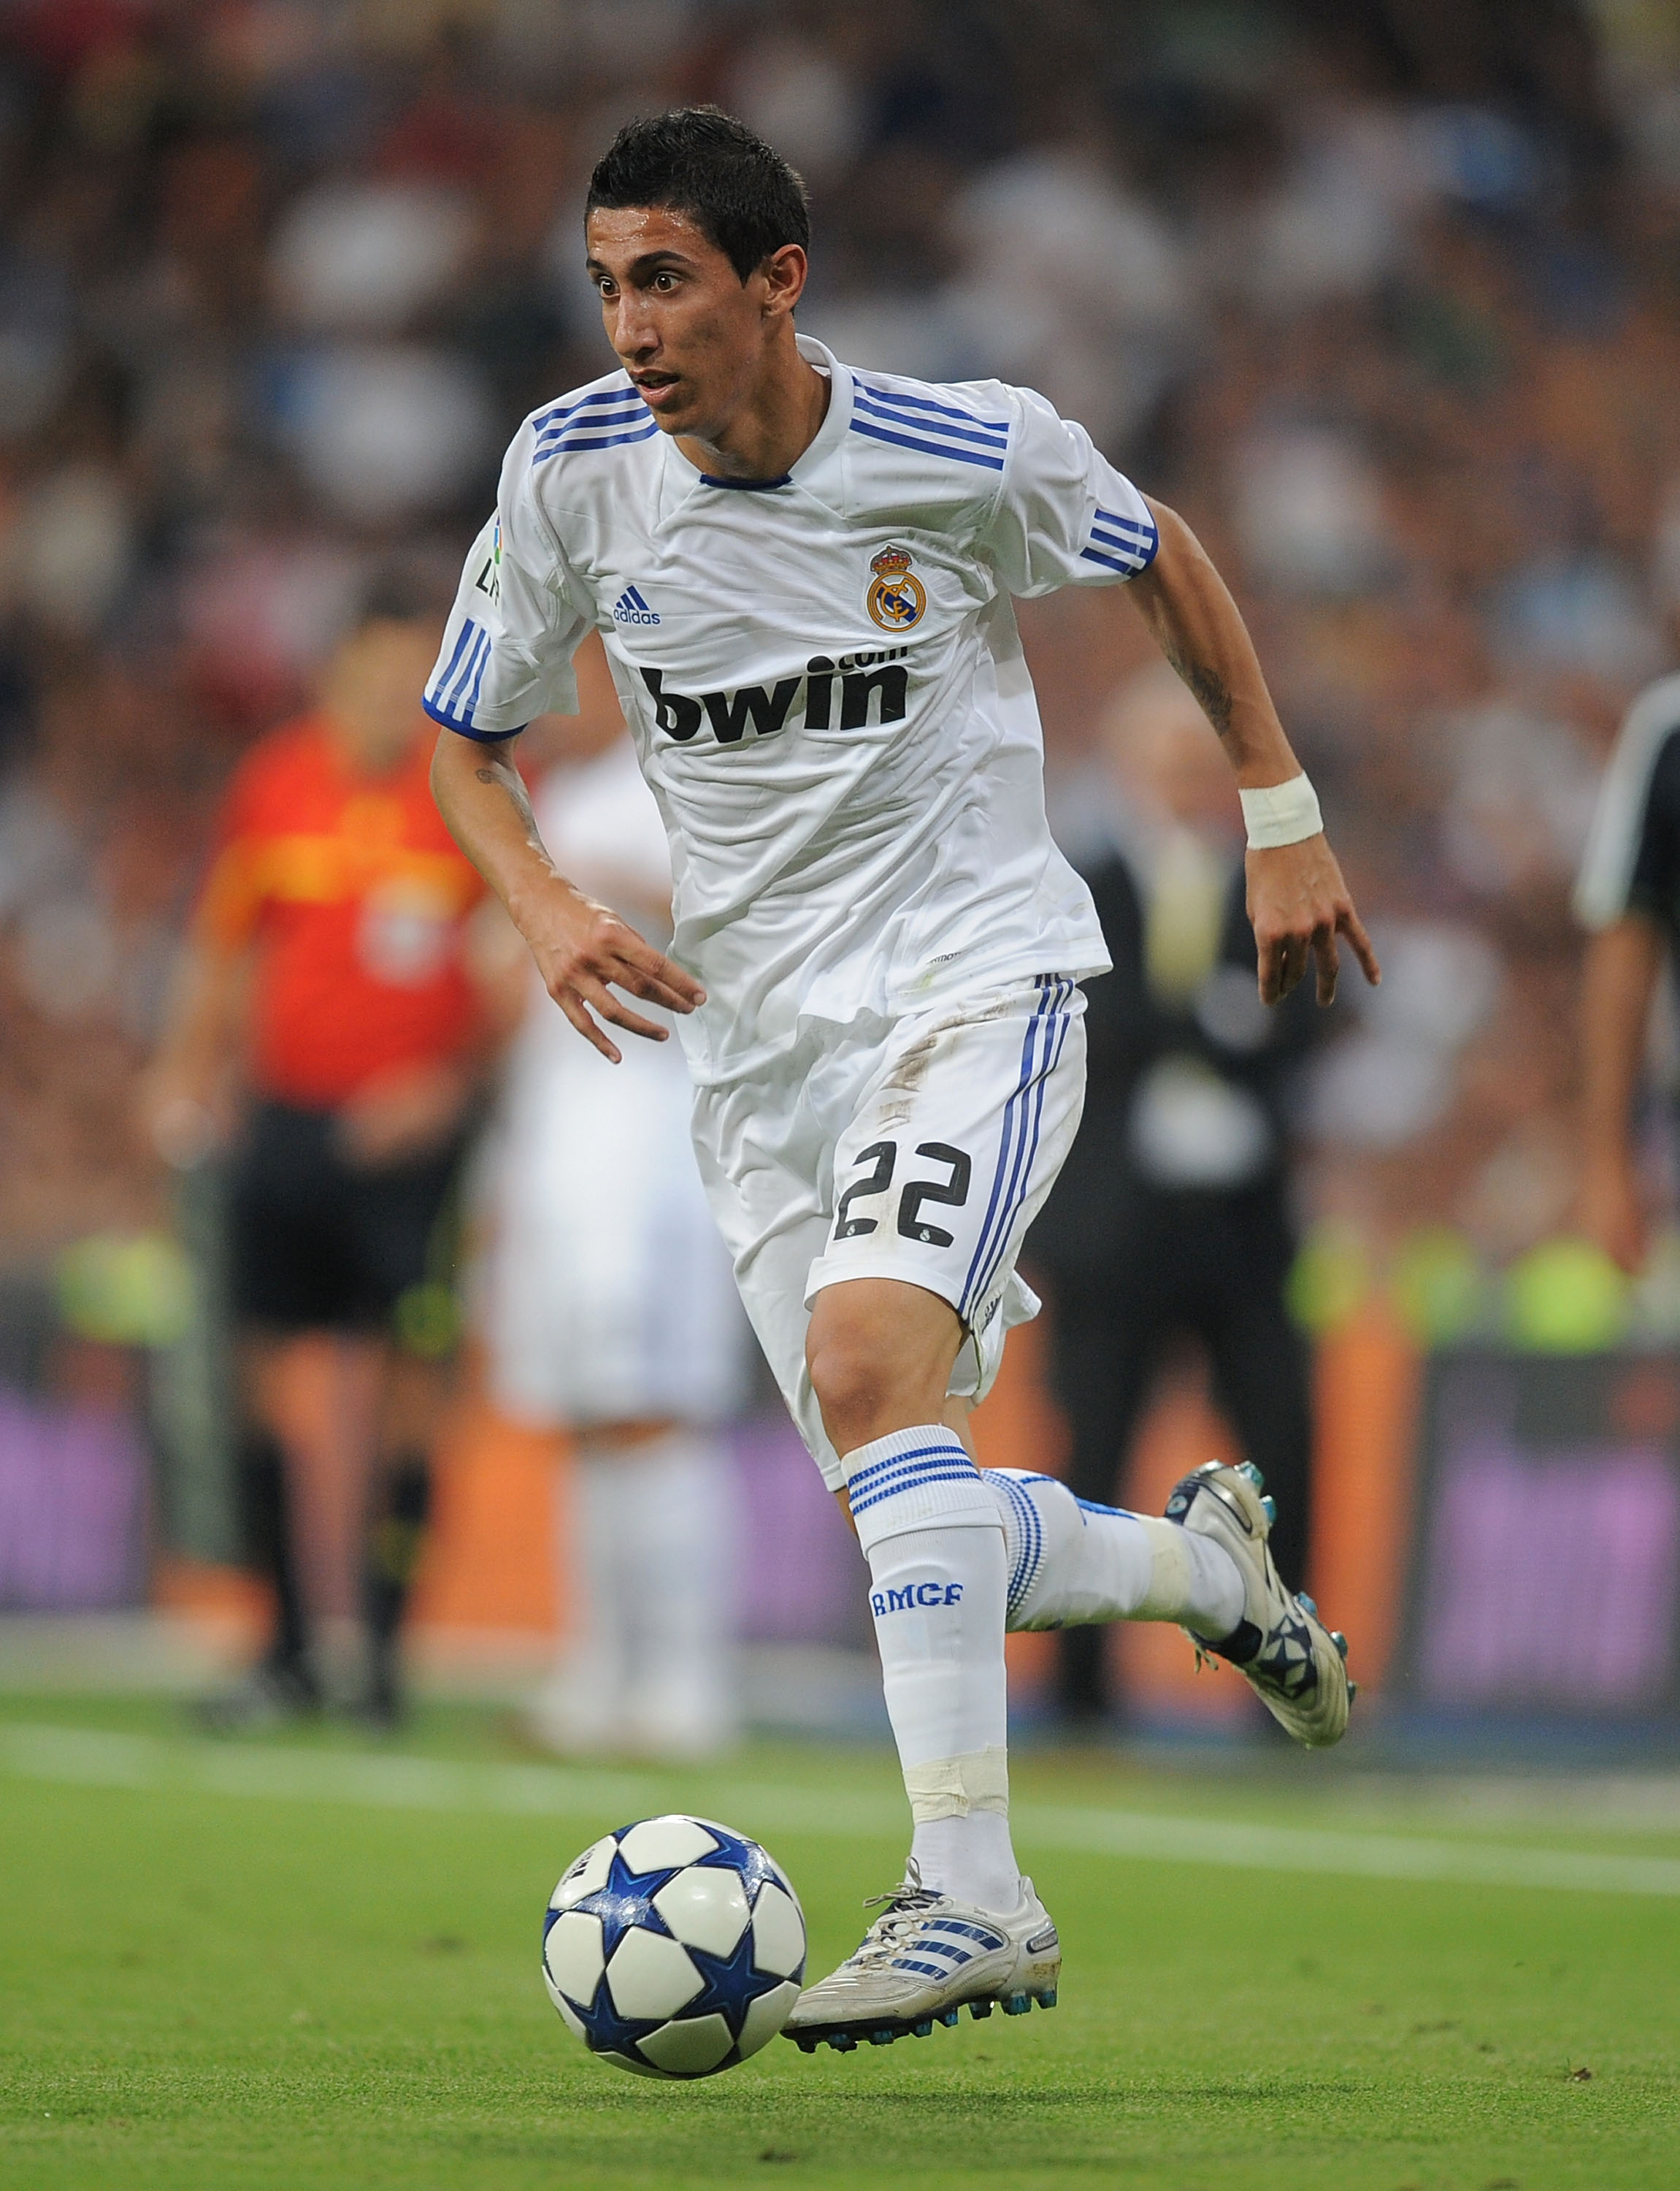 MADRID, SPAIN - AUGUST 24:  Angel Di Maria of Real Madrid in action during the Santiago Bernabeu Trophy match between Real Madrid and Penarol at the Santiago Bernabeu stadium on August 24, 2010 in Madrid, Spain.  (Photo by Denis Doyle/Getty Images)